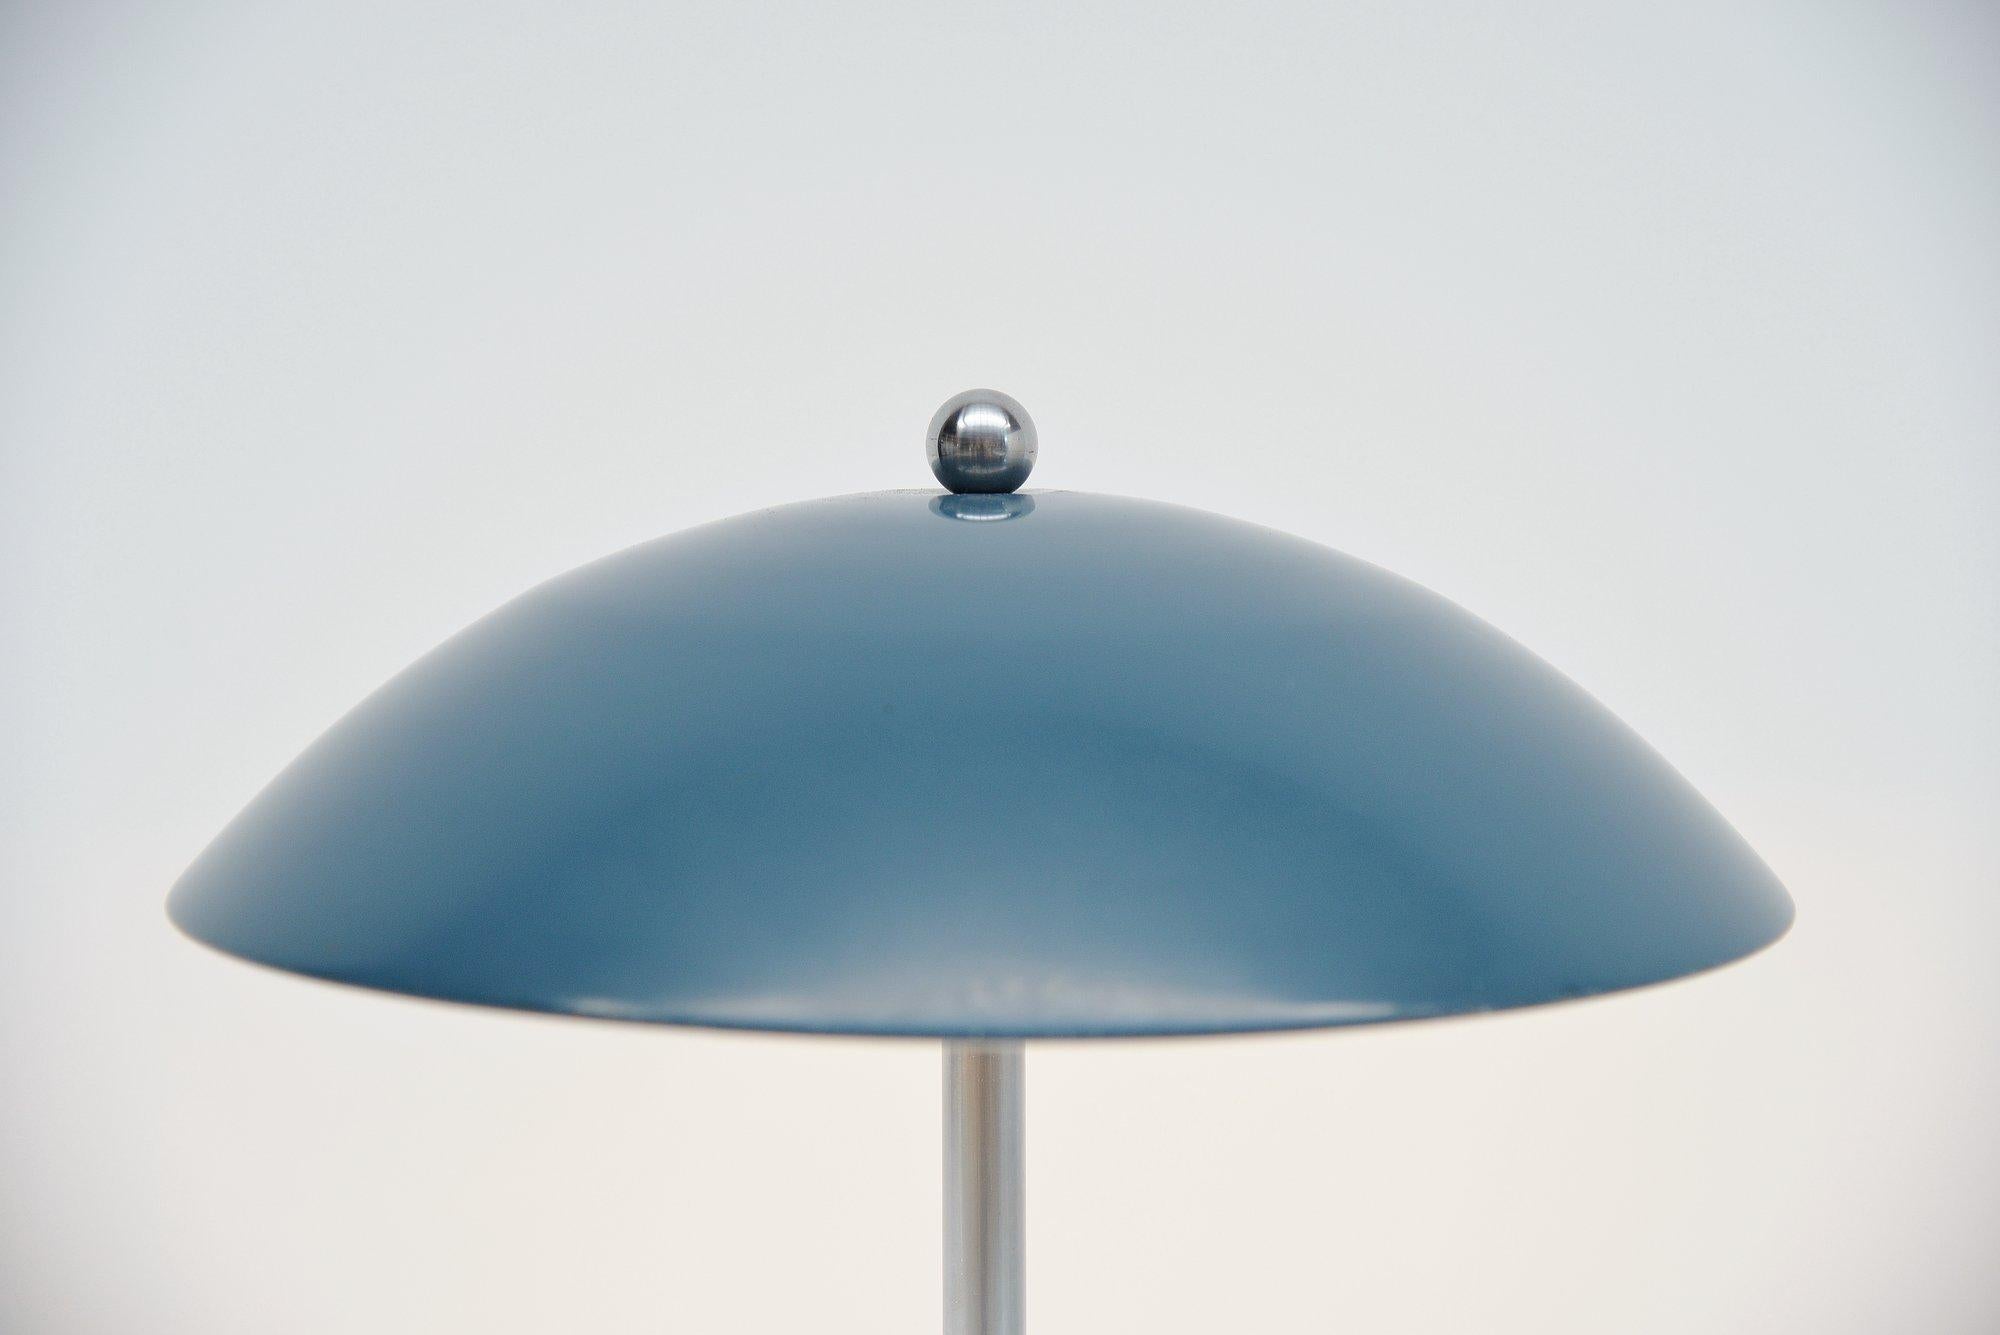 Very nice mushroom shaped table lamp model 5015 designed by Wim Rietveld and manufactured by Gispen Culemborg, Holland 1950. This lamp has a round weighted base, white lacquered with a brushed steel bar, uses 2 E27 bulbs up to 60 watt and has an